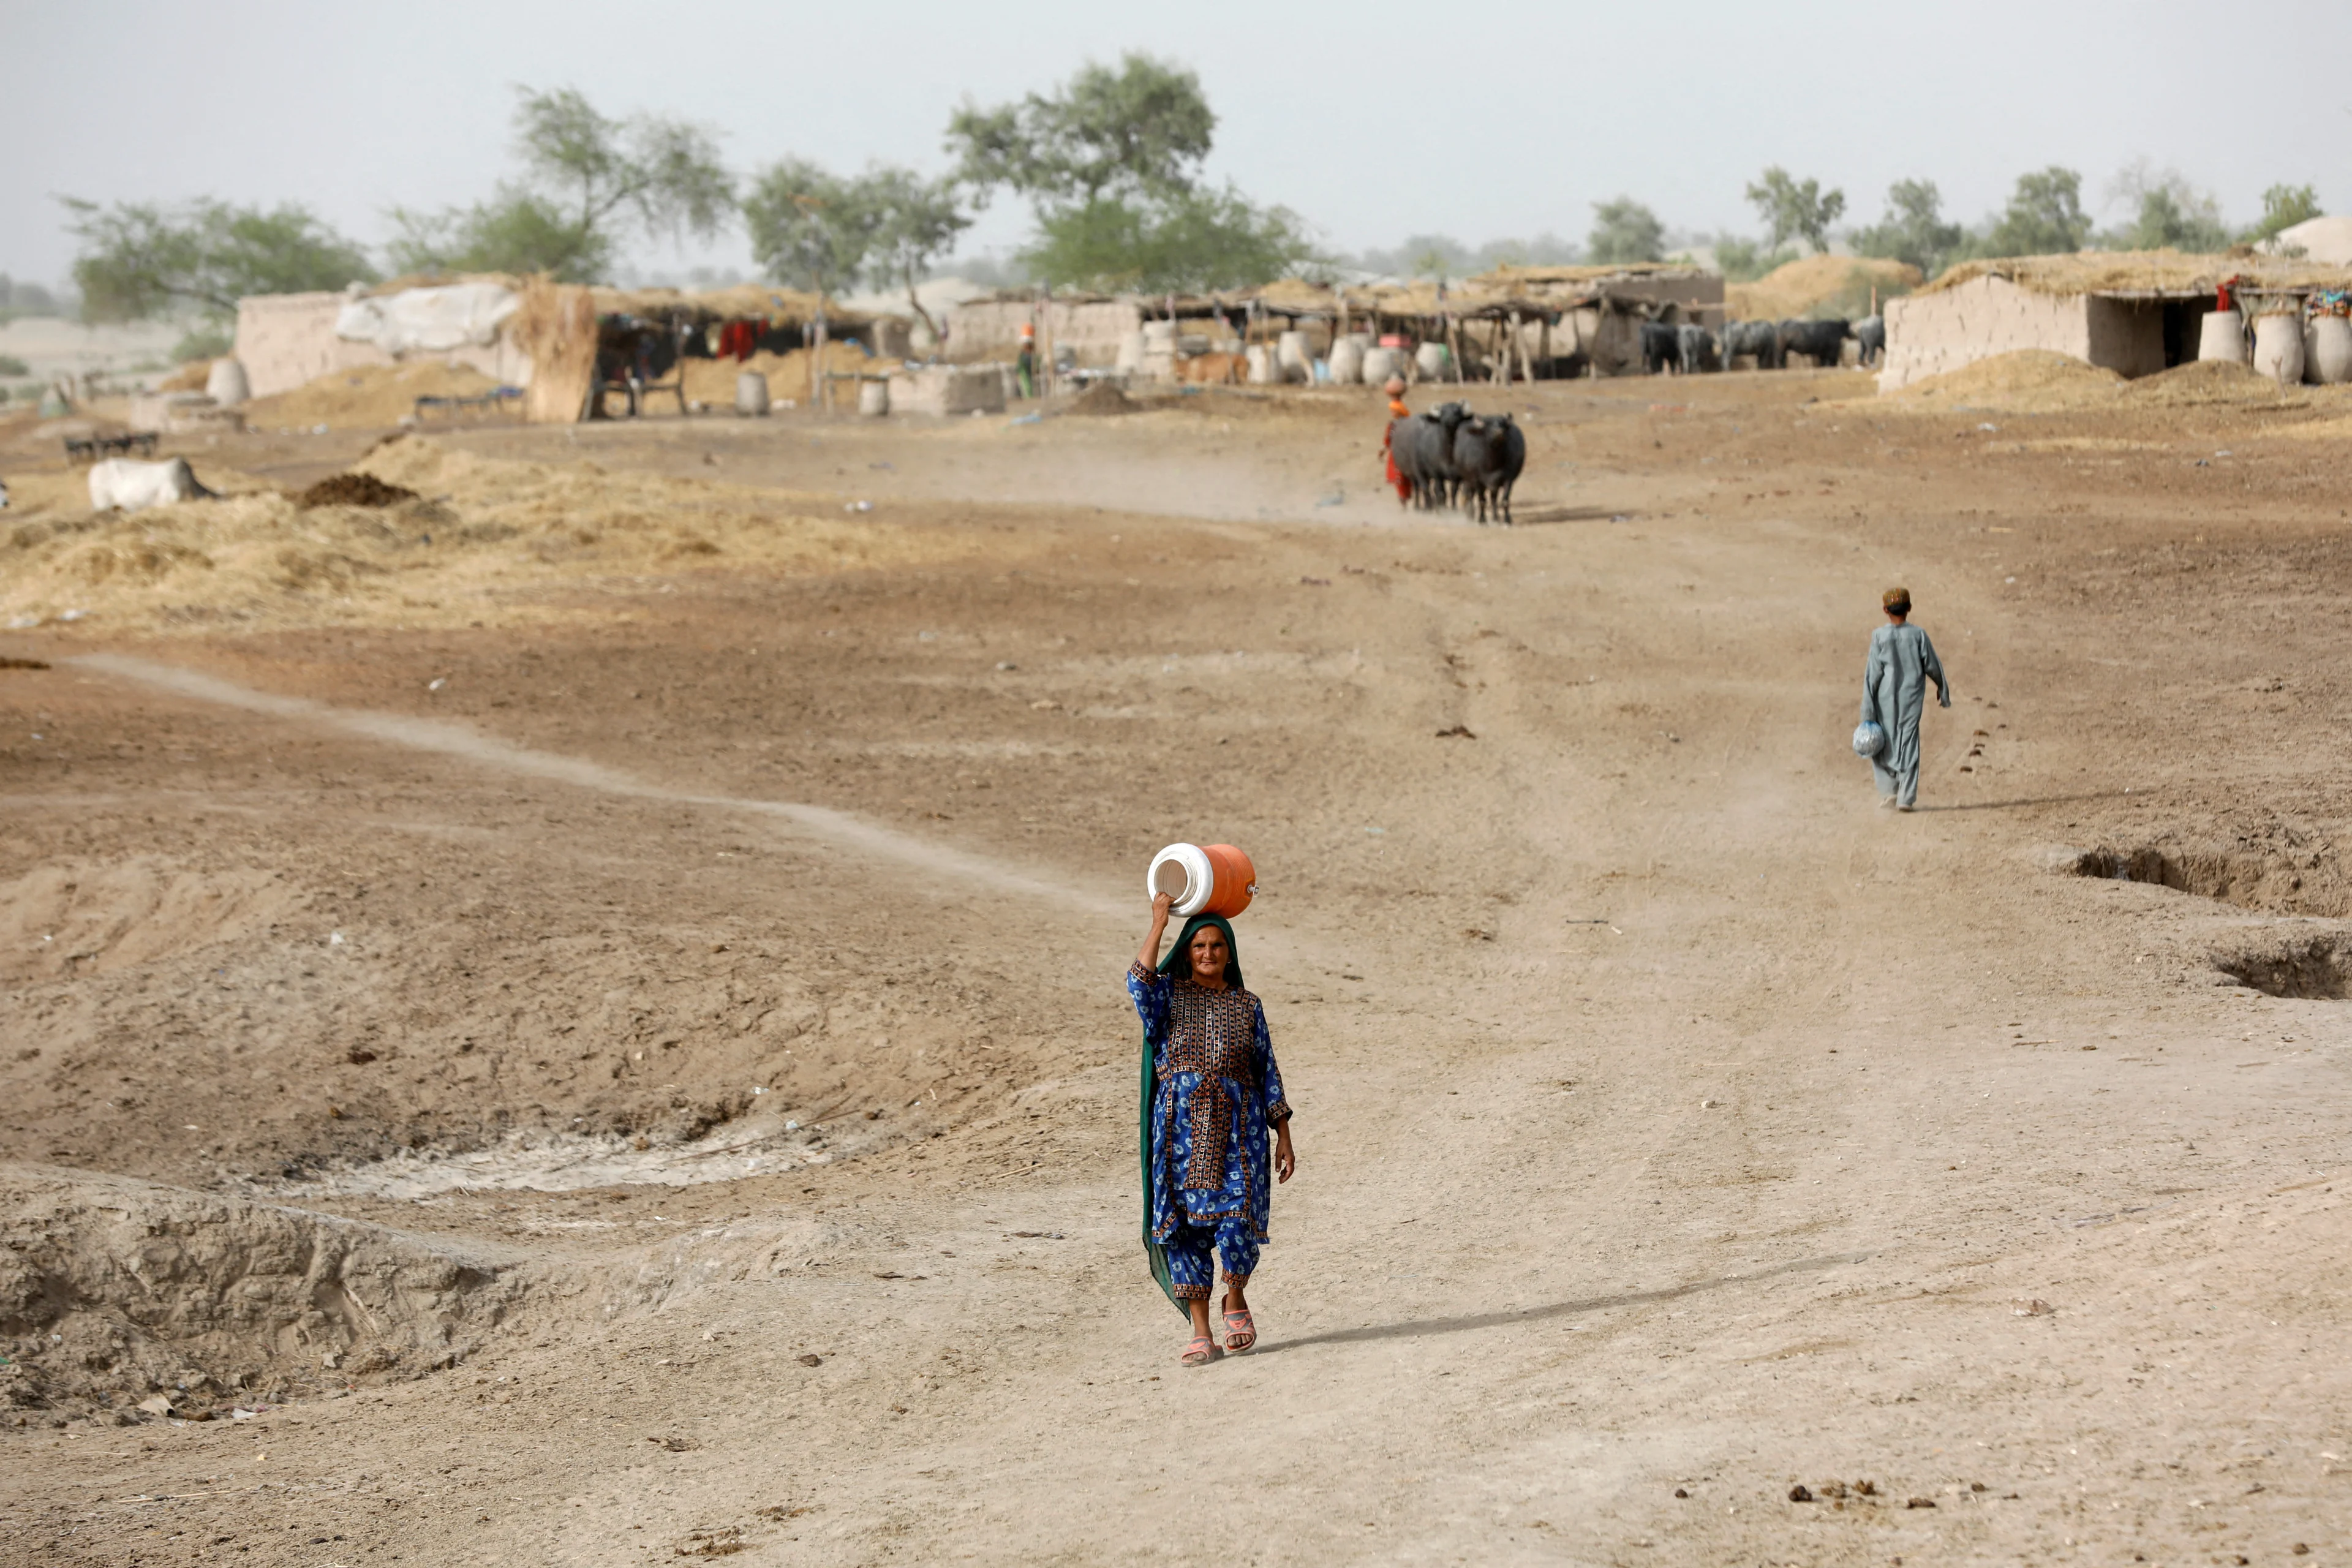 REUTERS: ILE PHOTO: A woman walks to fetch water from a nearby hand-pump with a water cooler on her head, during a heatwave, on the outskirts of Jacobabad, Pakistan, May 16, 2022. REUTERS/Akhtar Soomro/File Photo